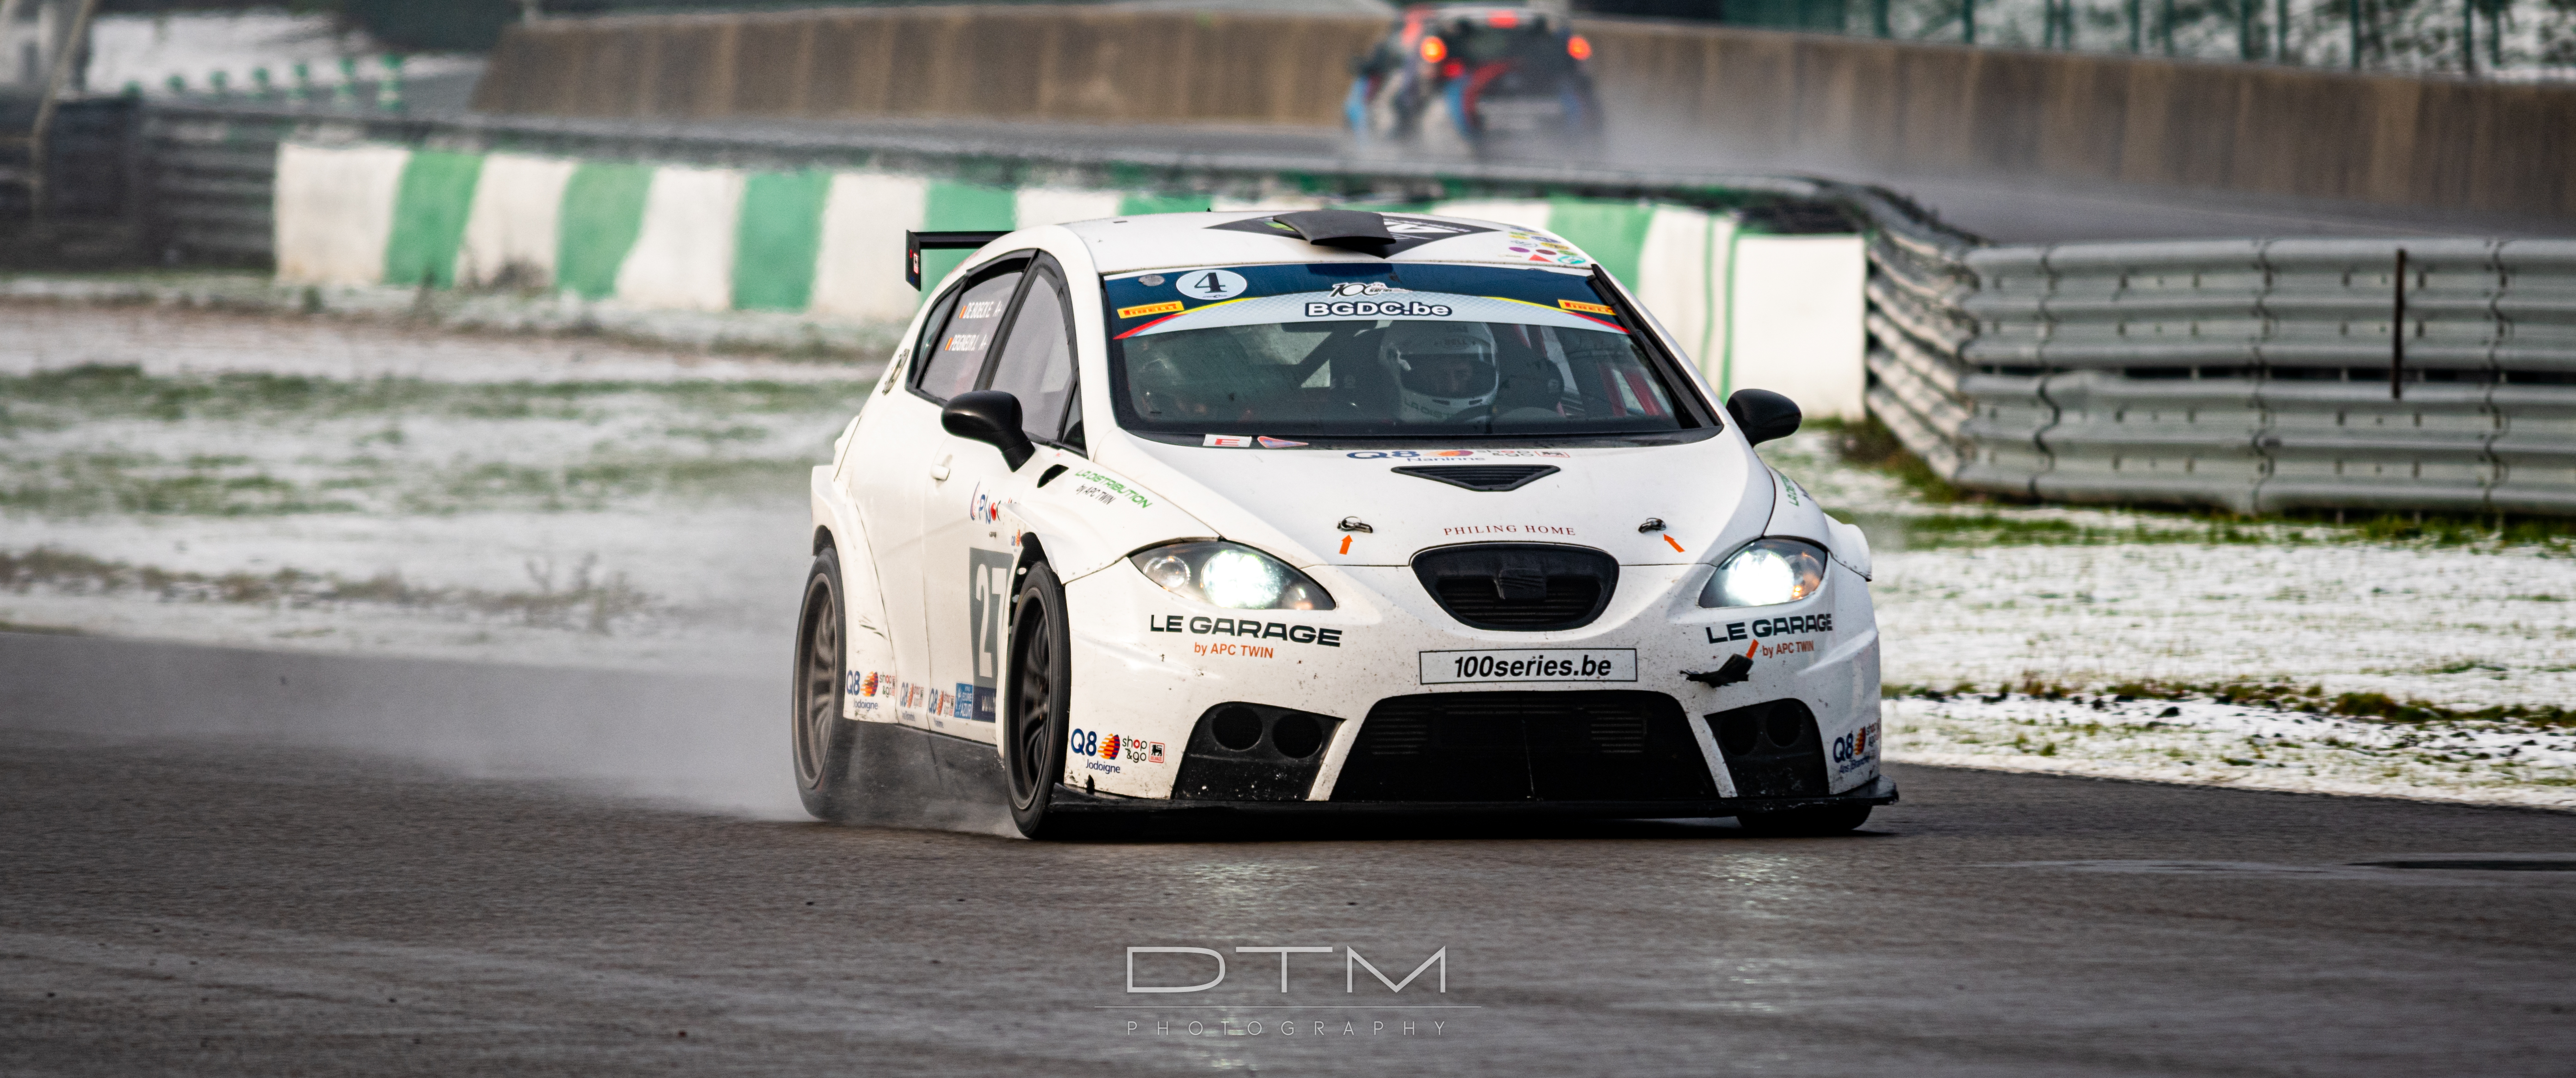 General 5568x2331 Circuit Jules Tacheny Seat Leon seat BGDC dtm photography car frontal view headlights race tracks race cars hatchbacks hot hatch Spanish cars Volkswagen Group